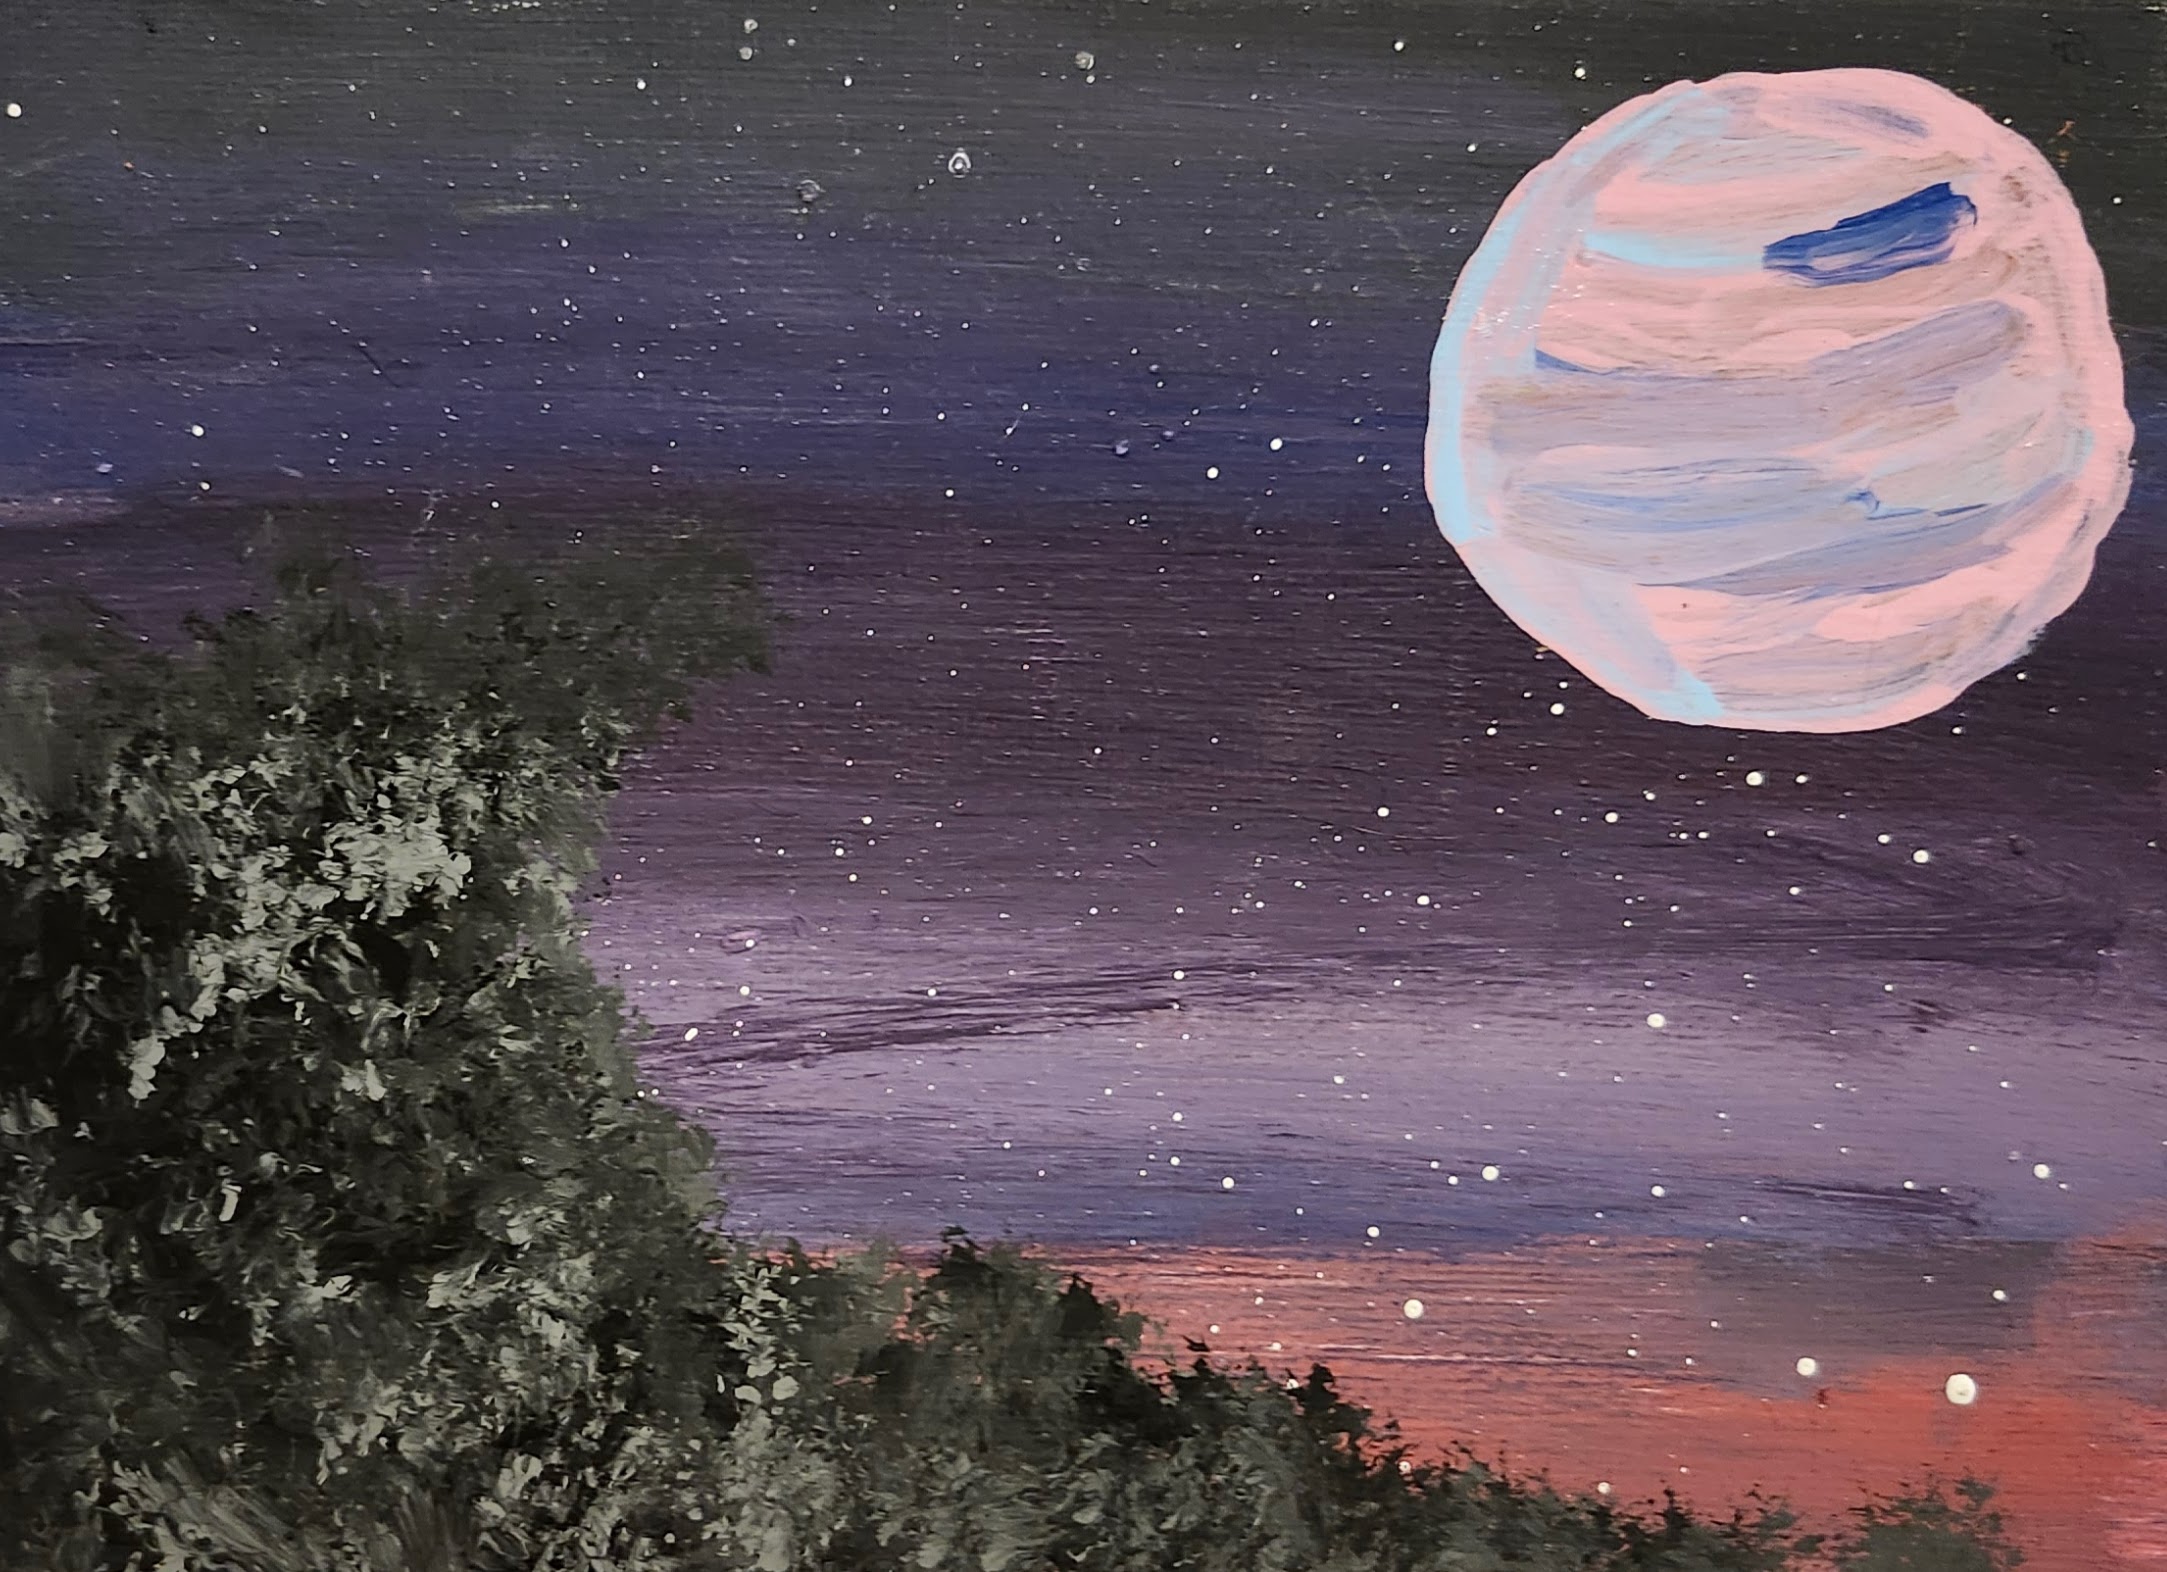 Acrylic night landscape with a tree in the foreground and a pink moon